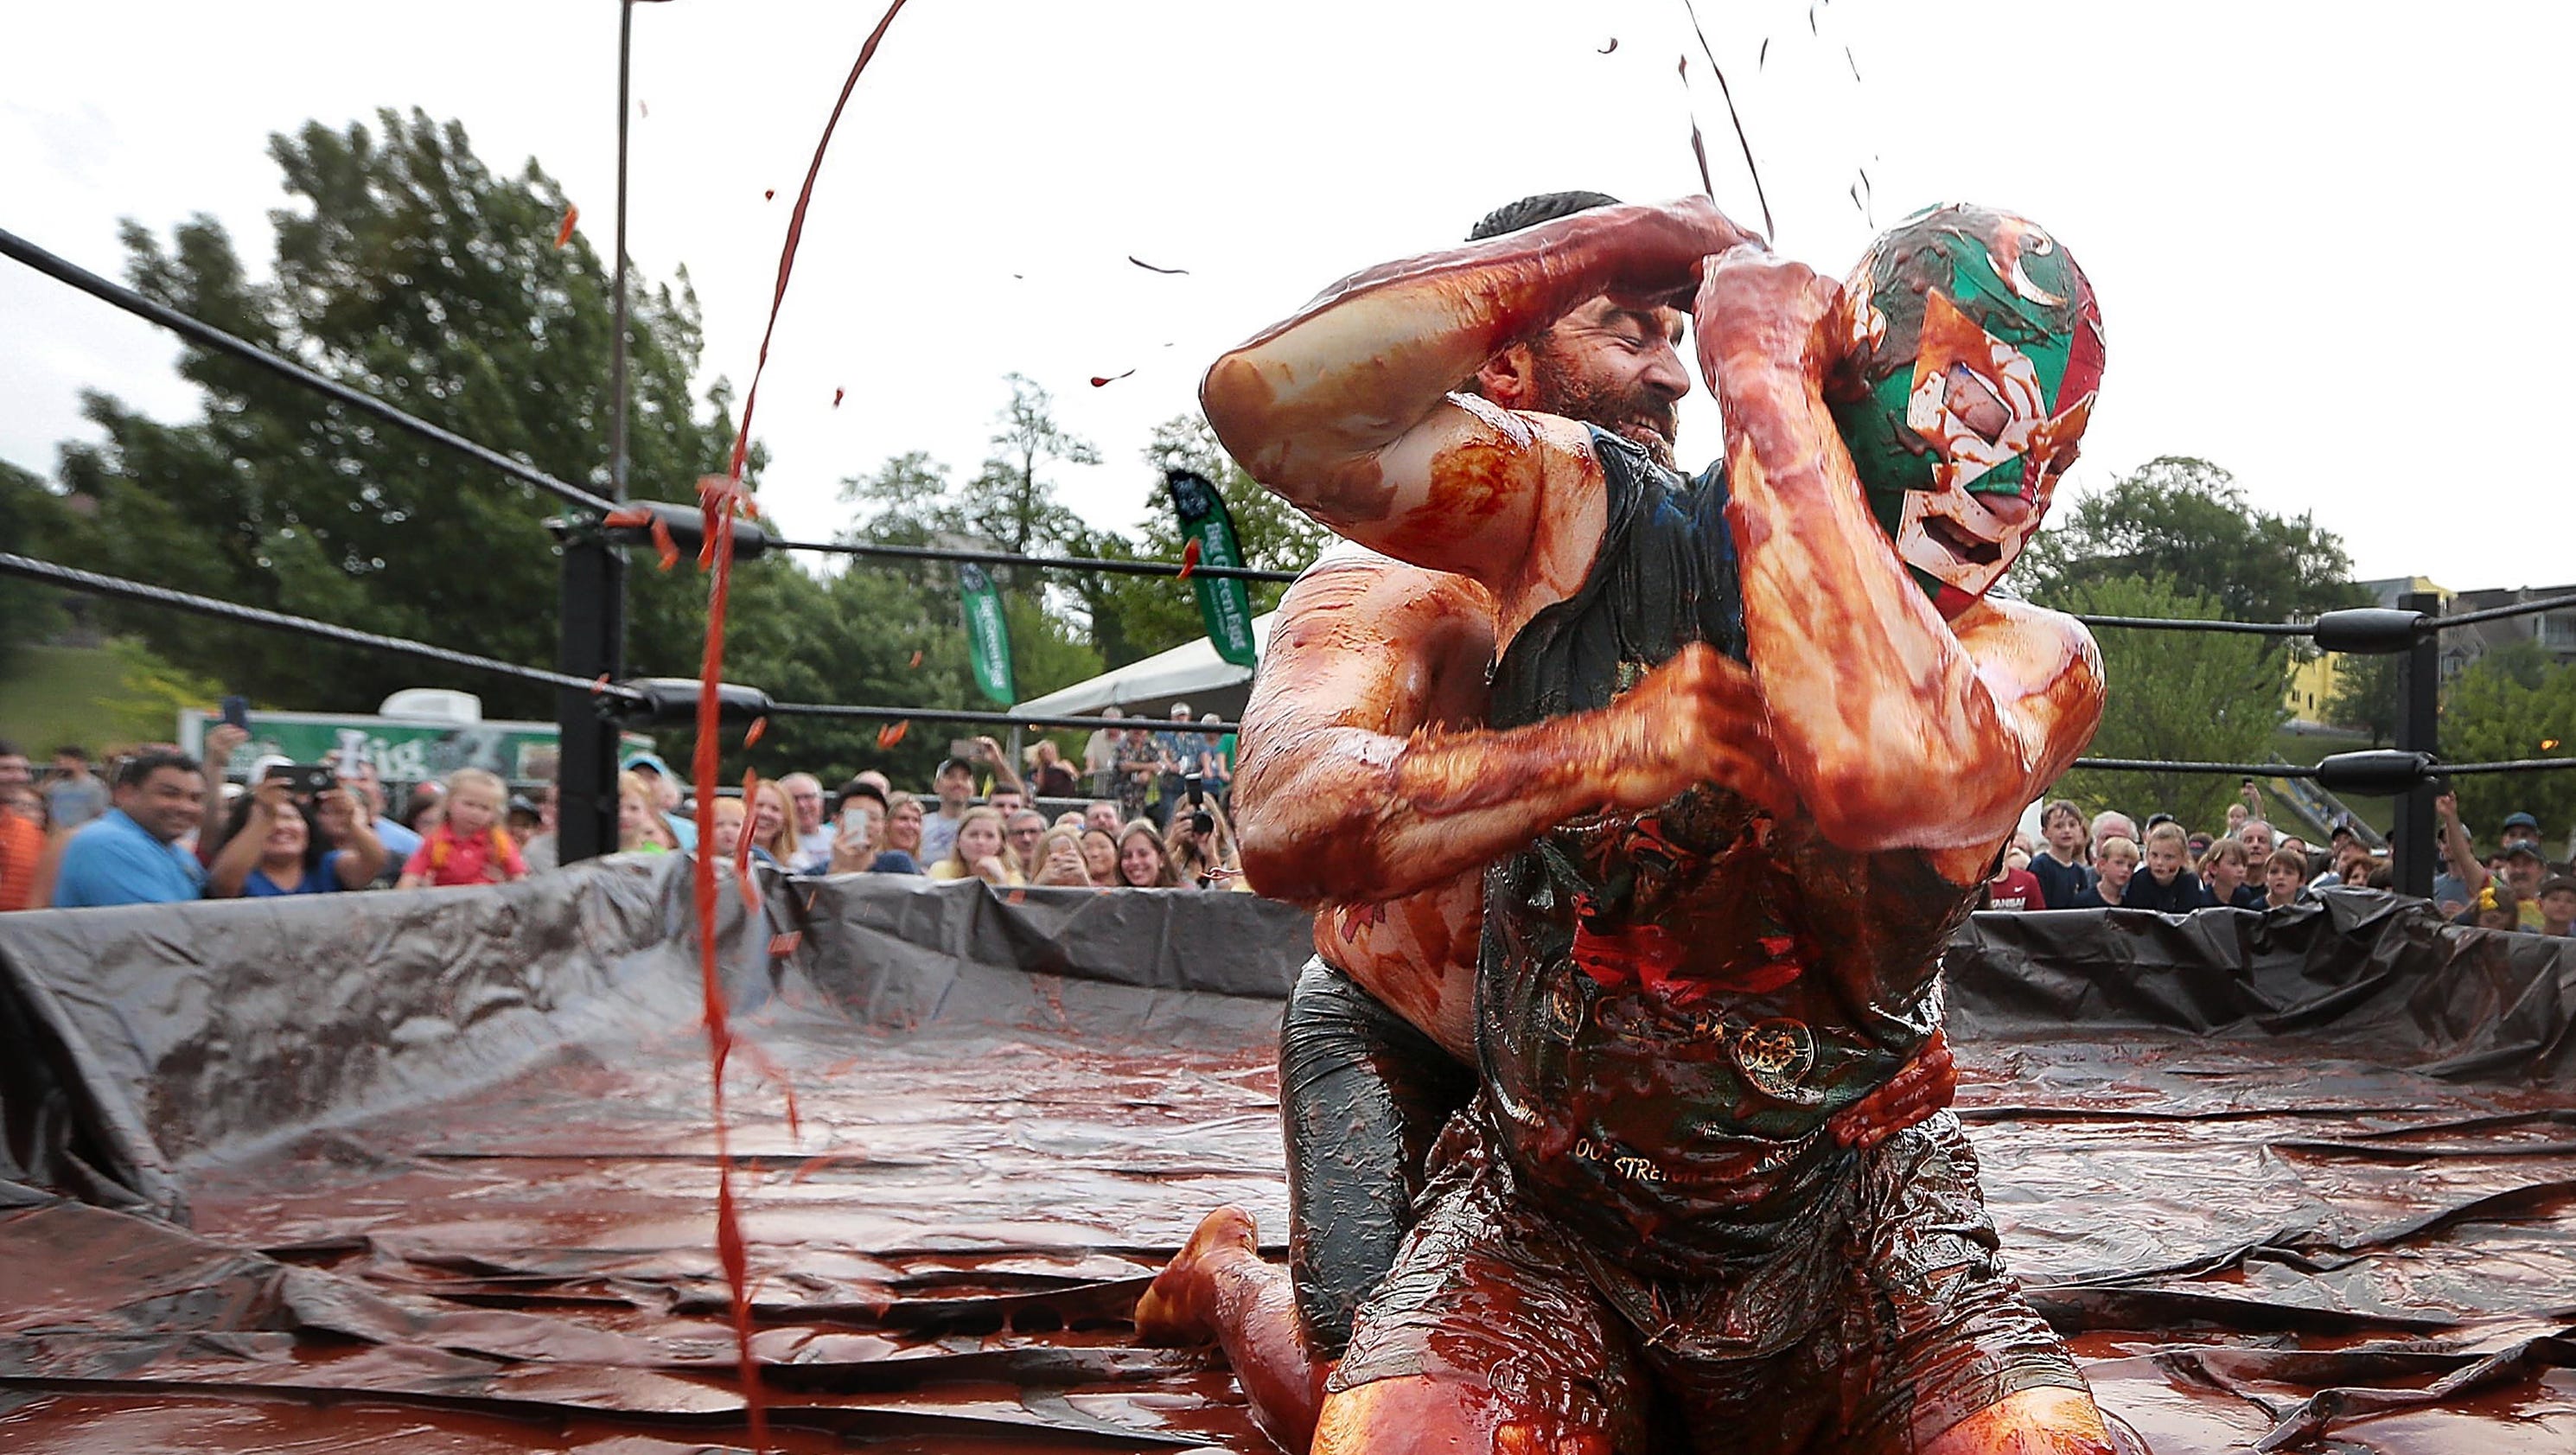 Calkins: Barbecue sauce wrestling makes 'gross' return in Memphis - The Commercial Appeal